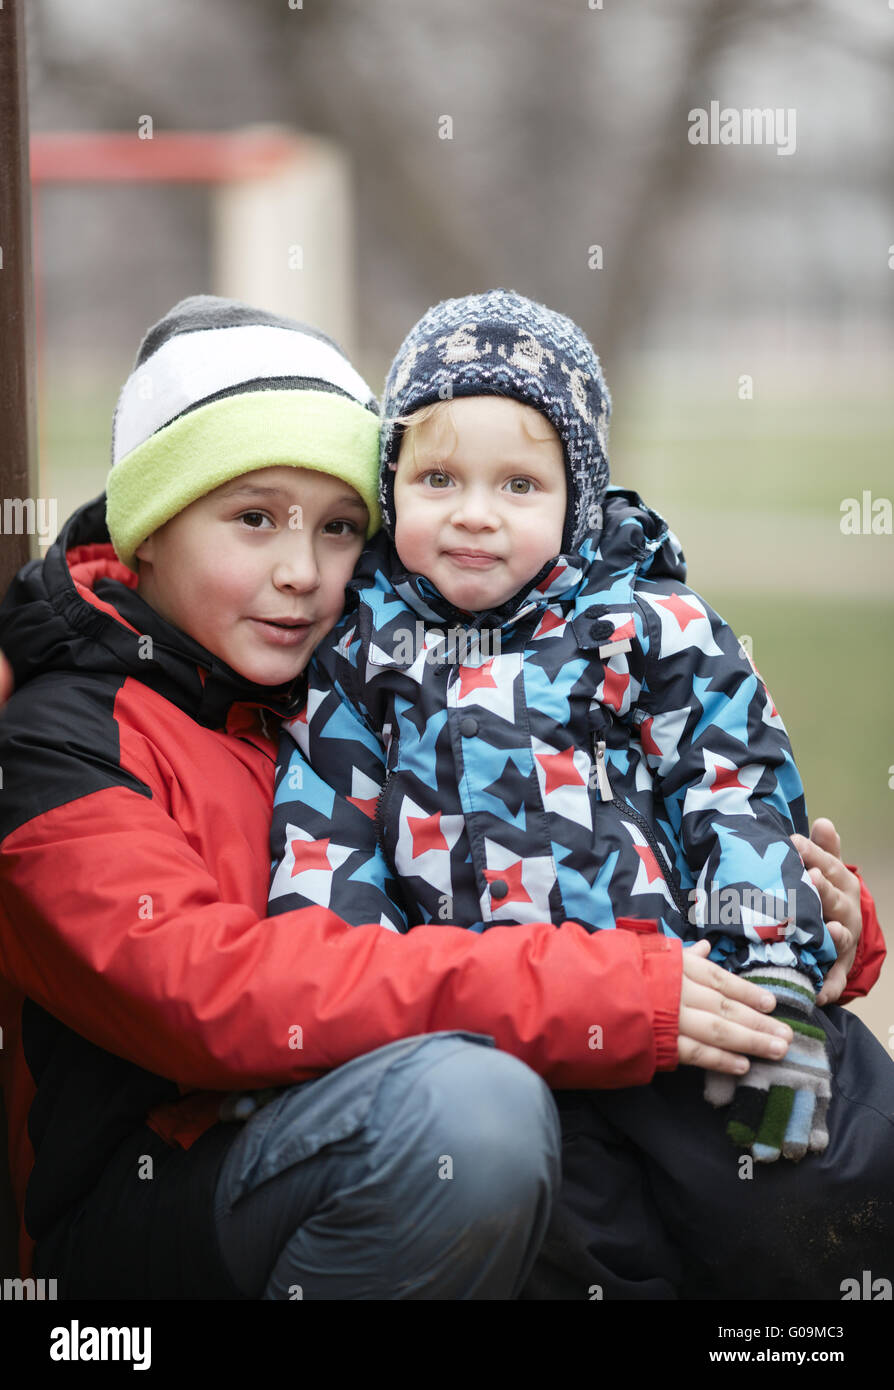 Two adorable young brothers outdoors in winter Stock Photo